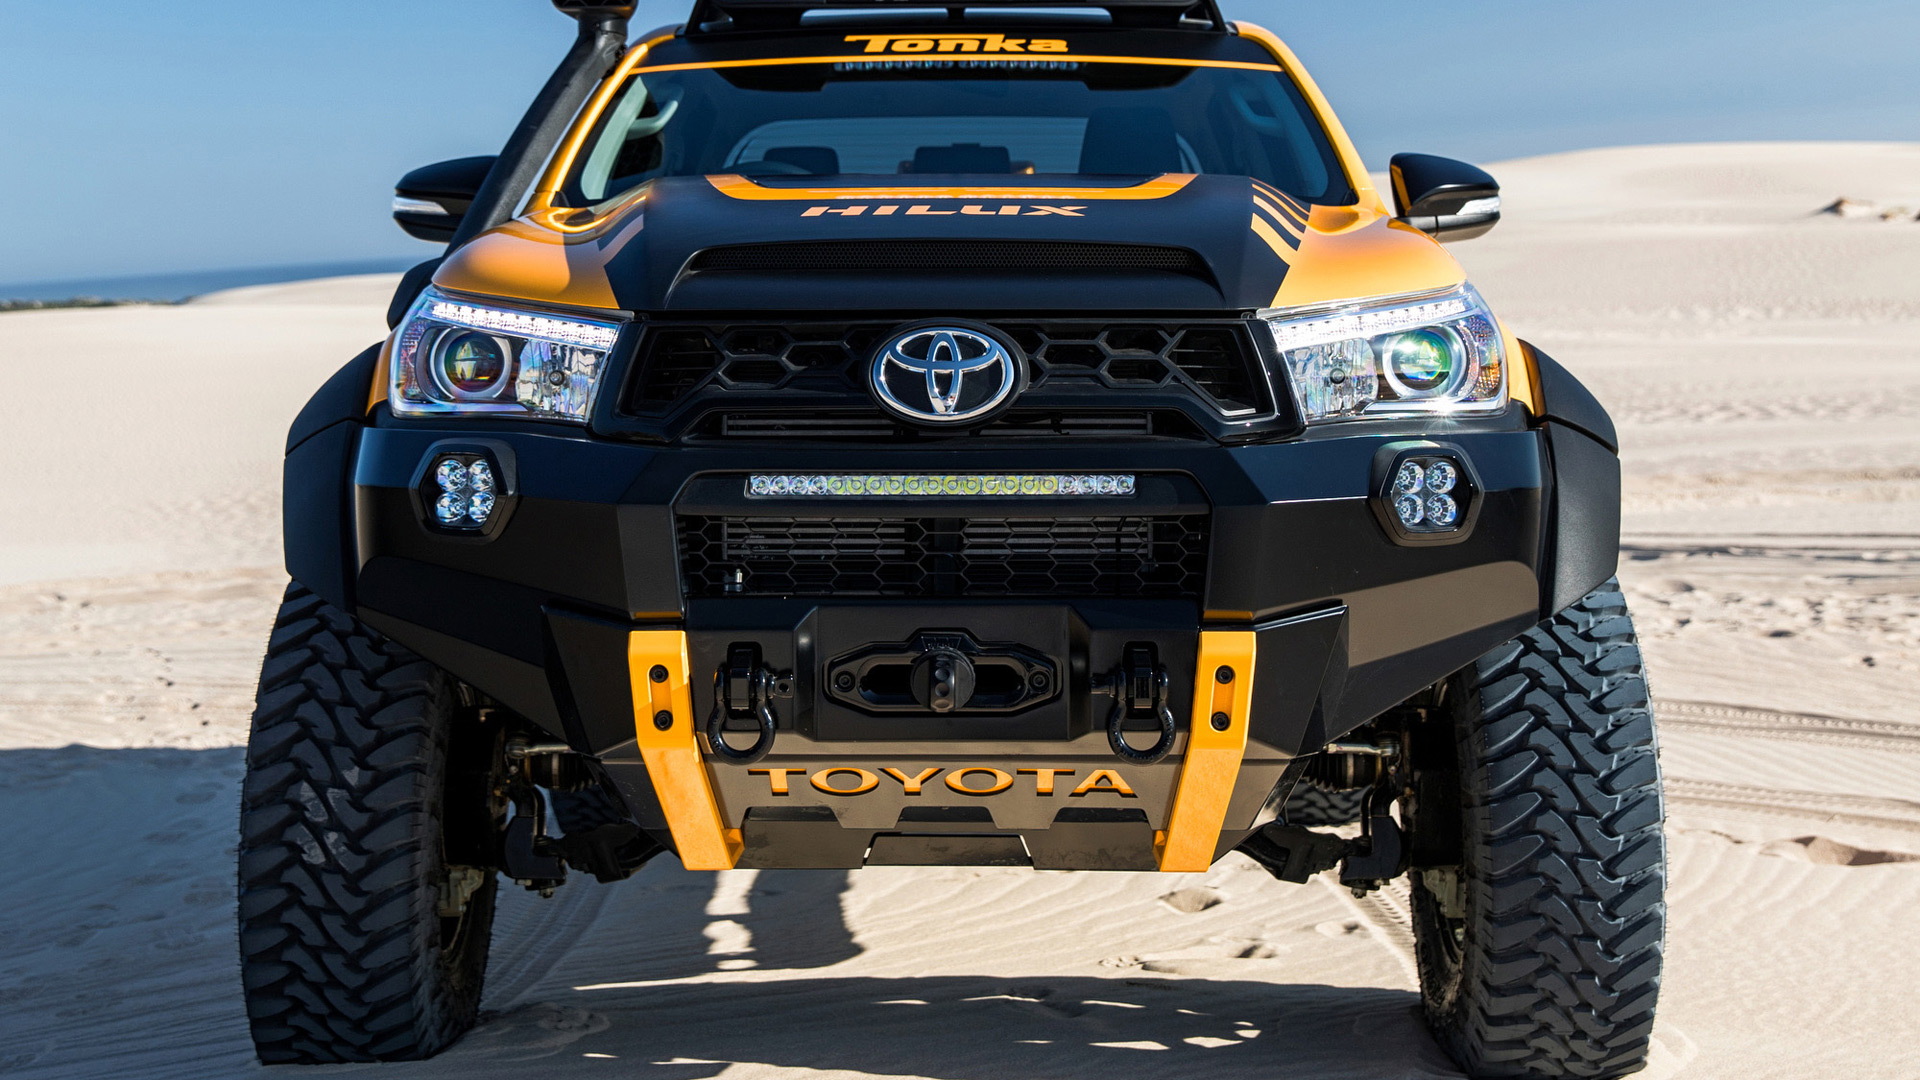 Toyota Hilux Tonka concept is for the inner child in all of us